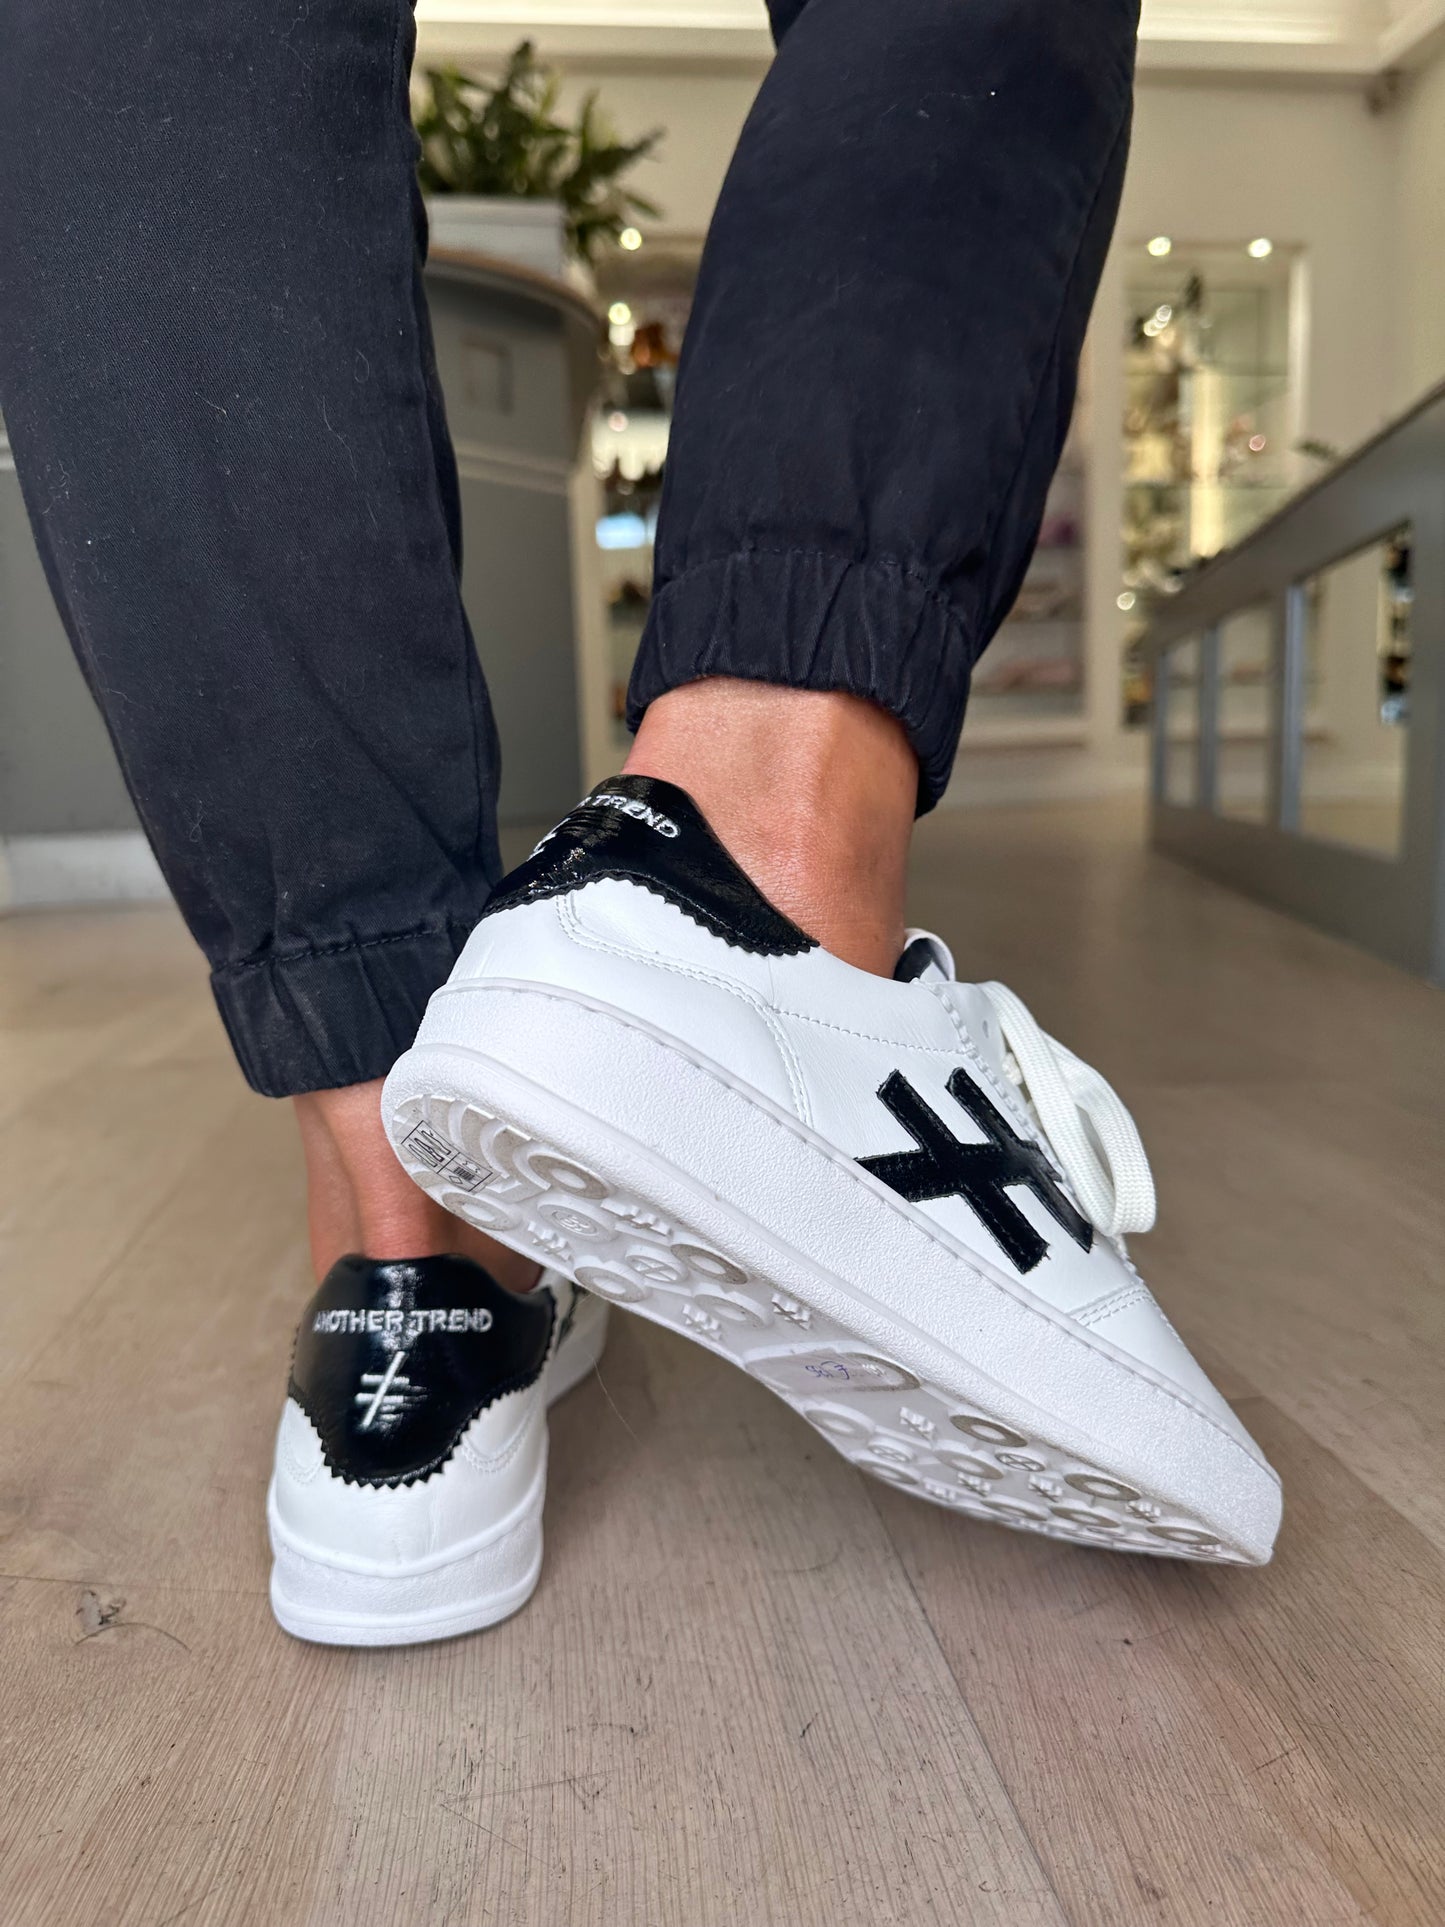 Alpe (Another Trend) - White/Black Trim Trainer